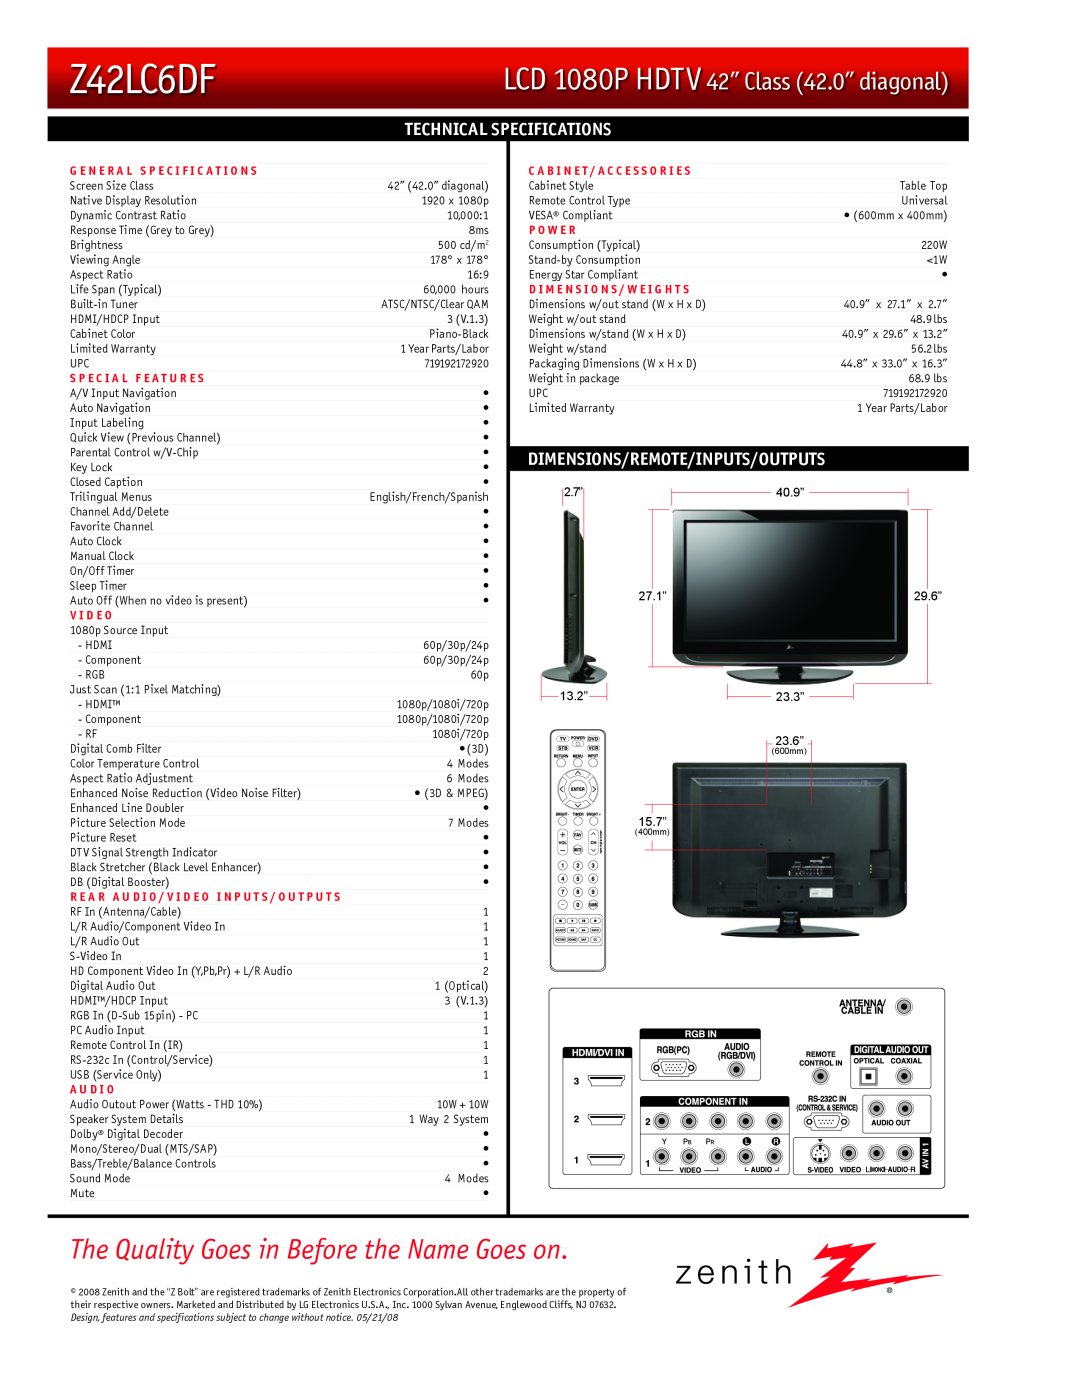 Zenith Z42LC6DF Technical Specifications, Dimensions/Remote/Inputs/Outputs, The Quality Goes in Before the Name Goes on 